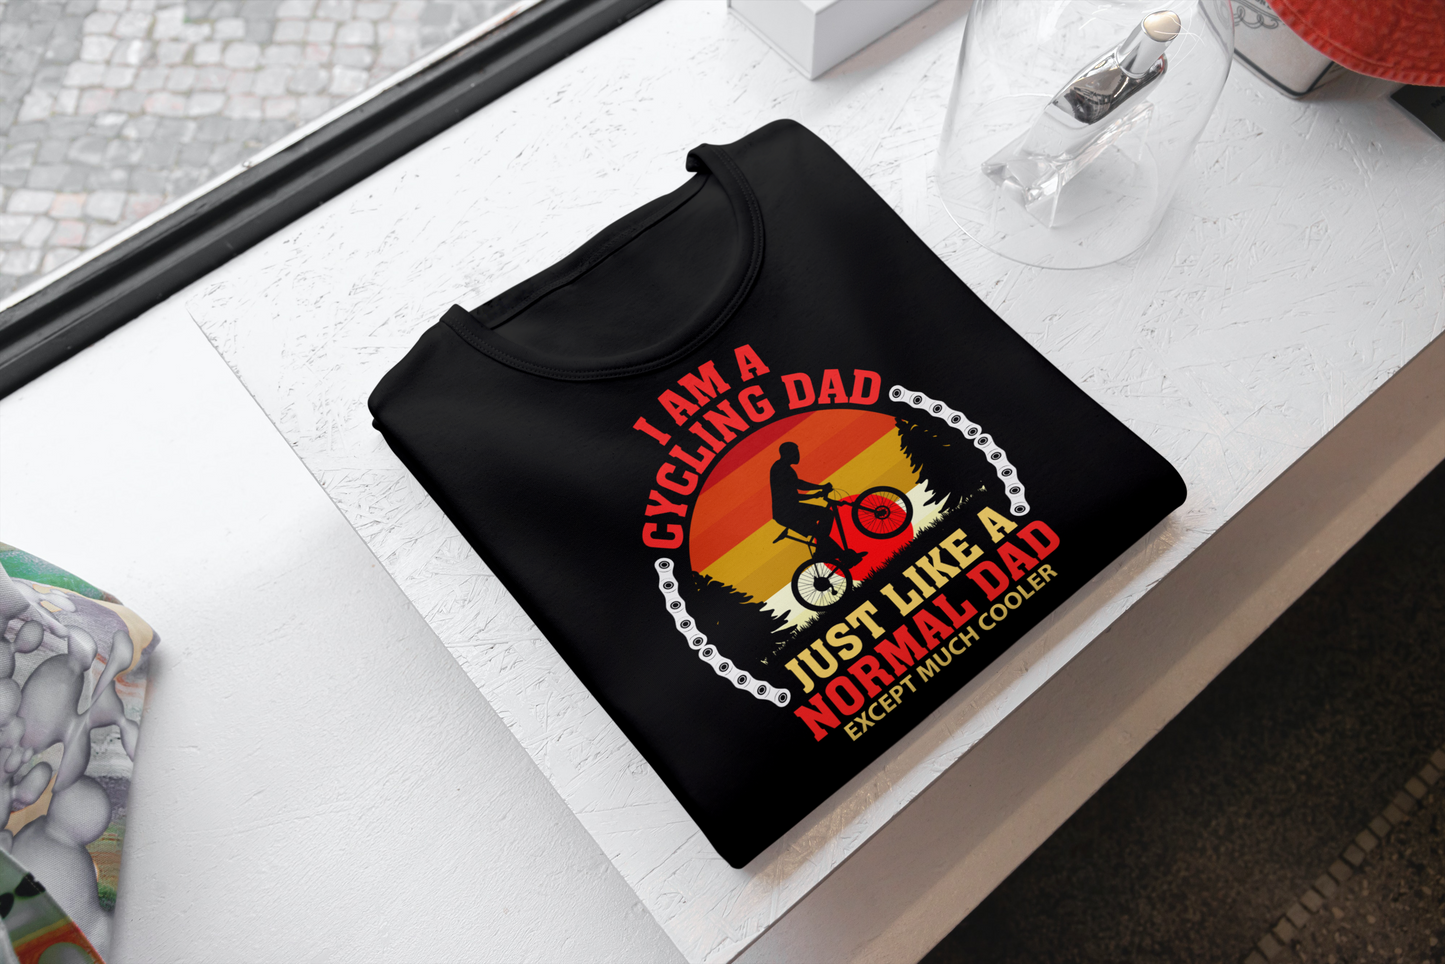 "I'm a cycling Dad, Just like a normal dad, but much cooler" Biking Dad Funny Men's Classic T-Shirt.